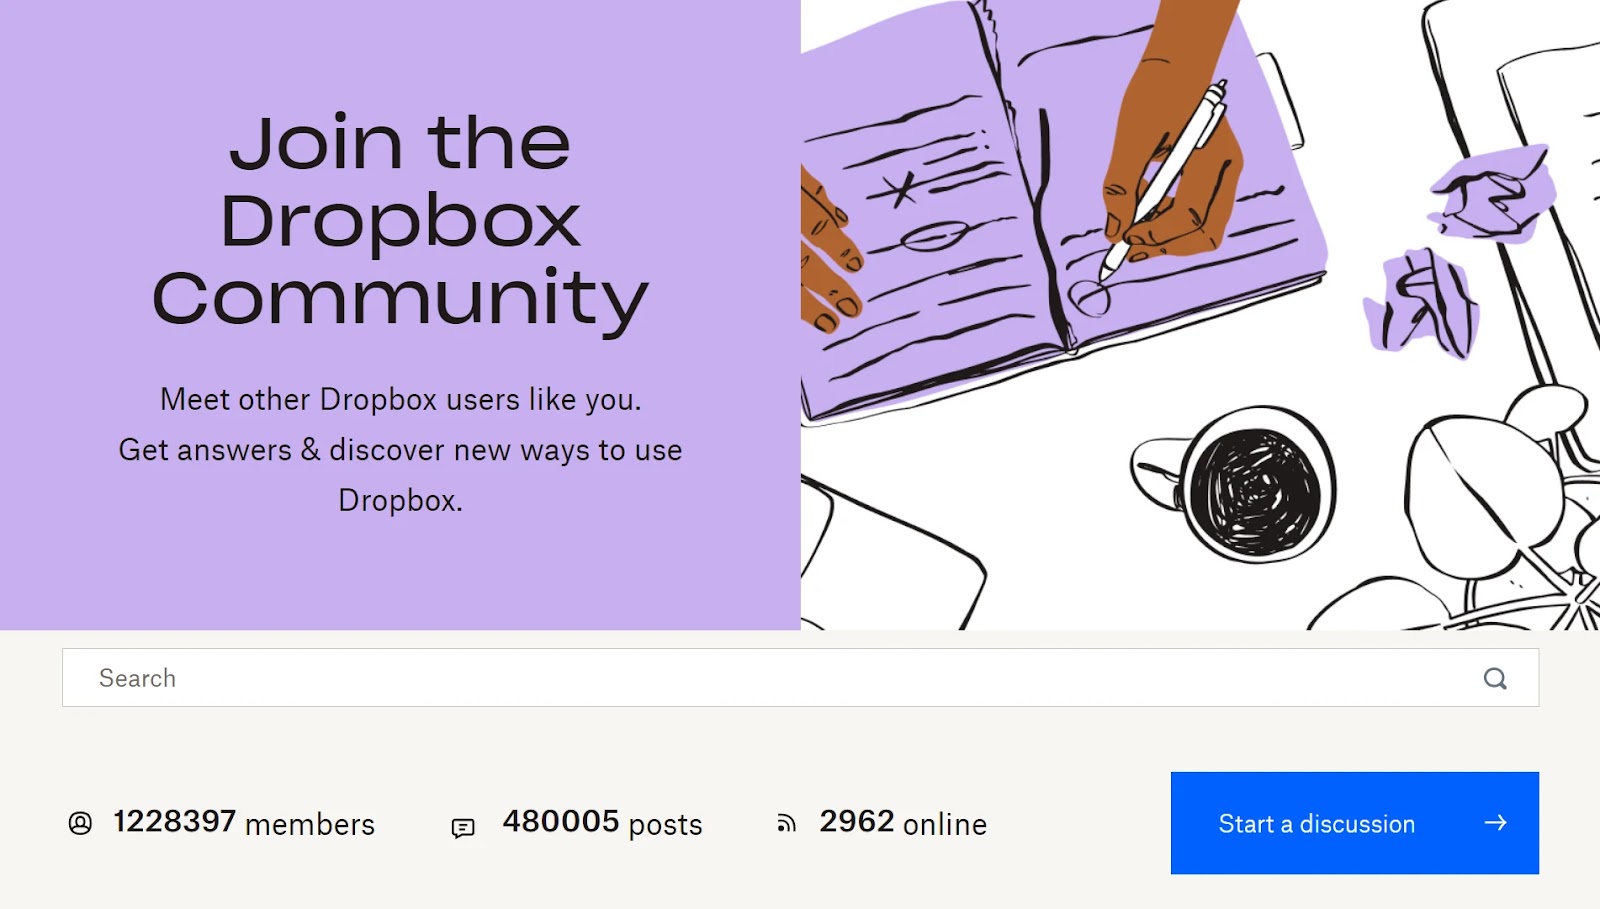 "Join the Dropbox Community" page